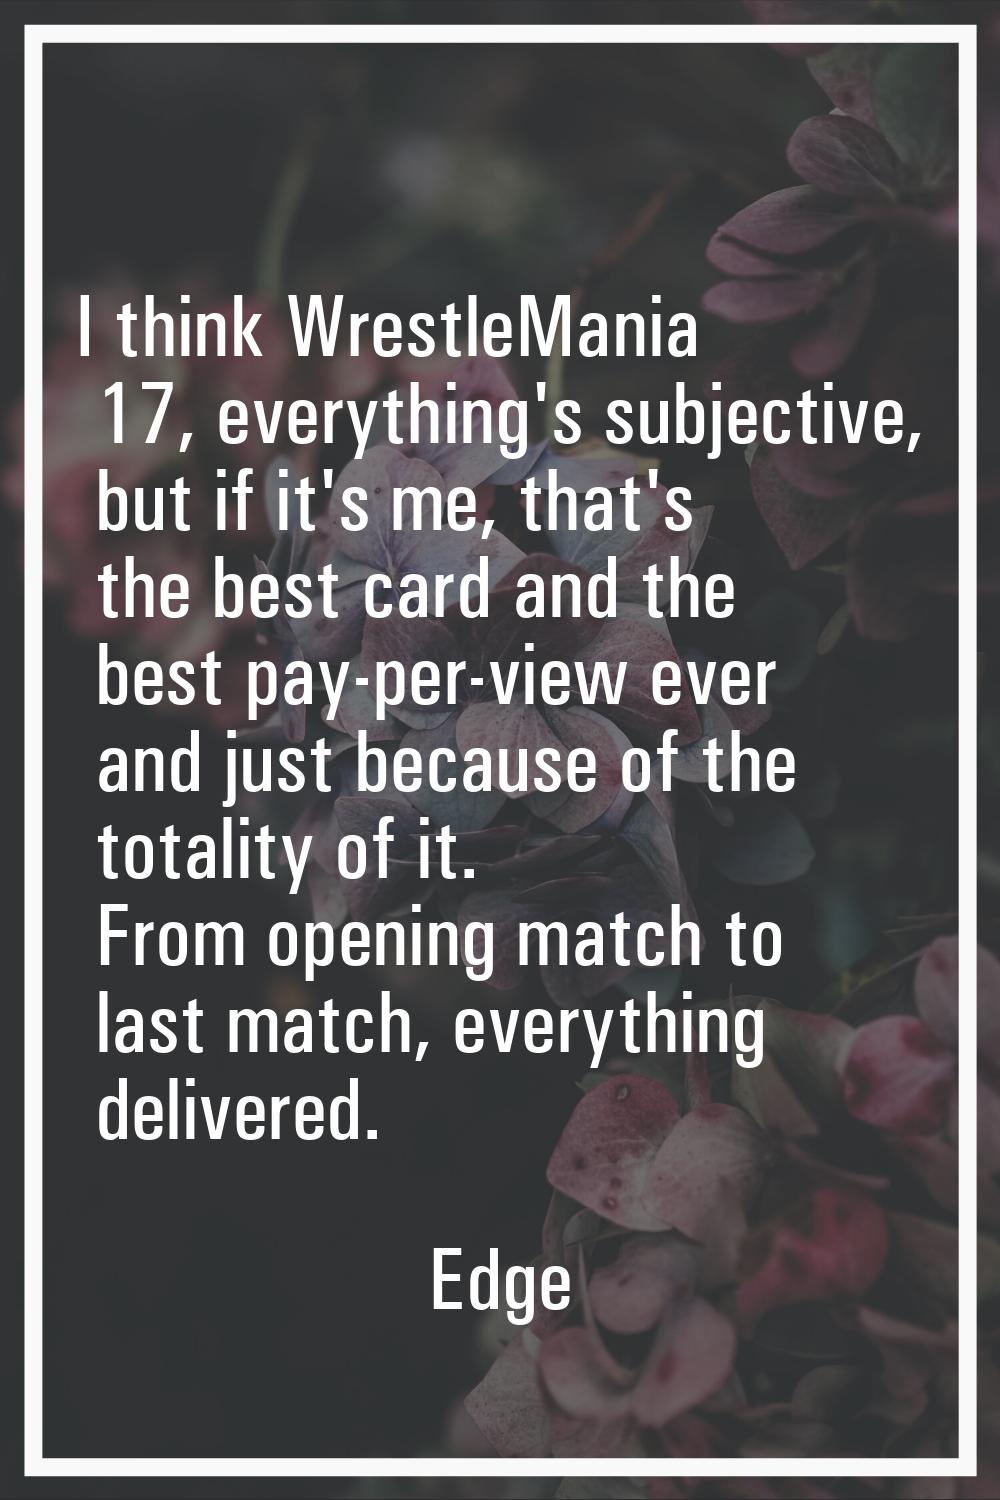 I think WrestleMania 17, everything's subjective, but if it's me, that's the best card and the best